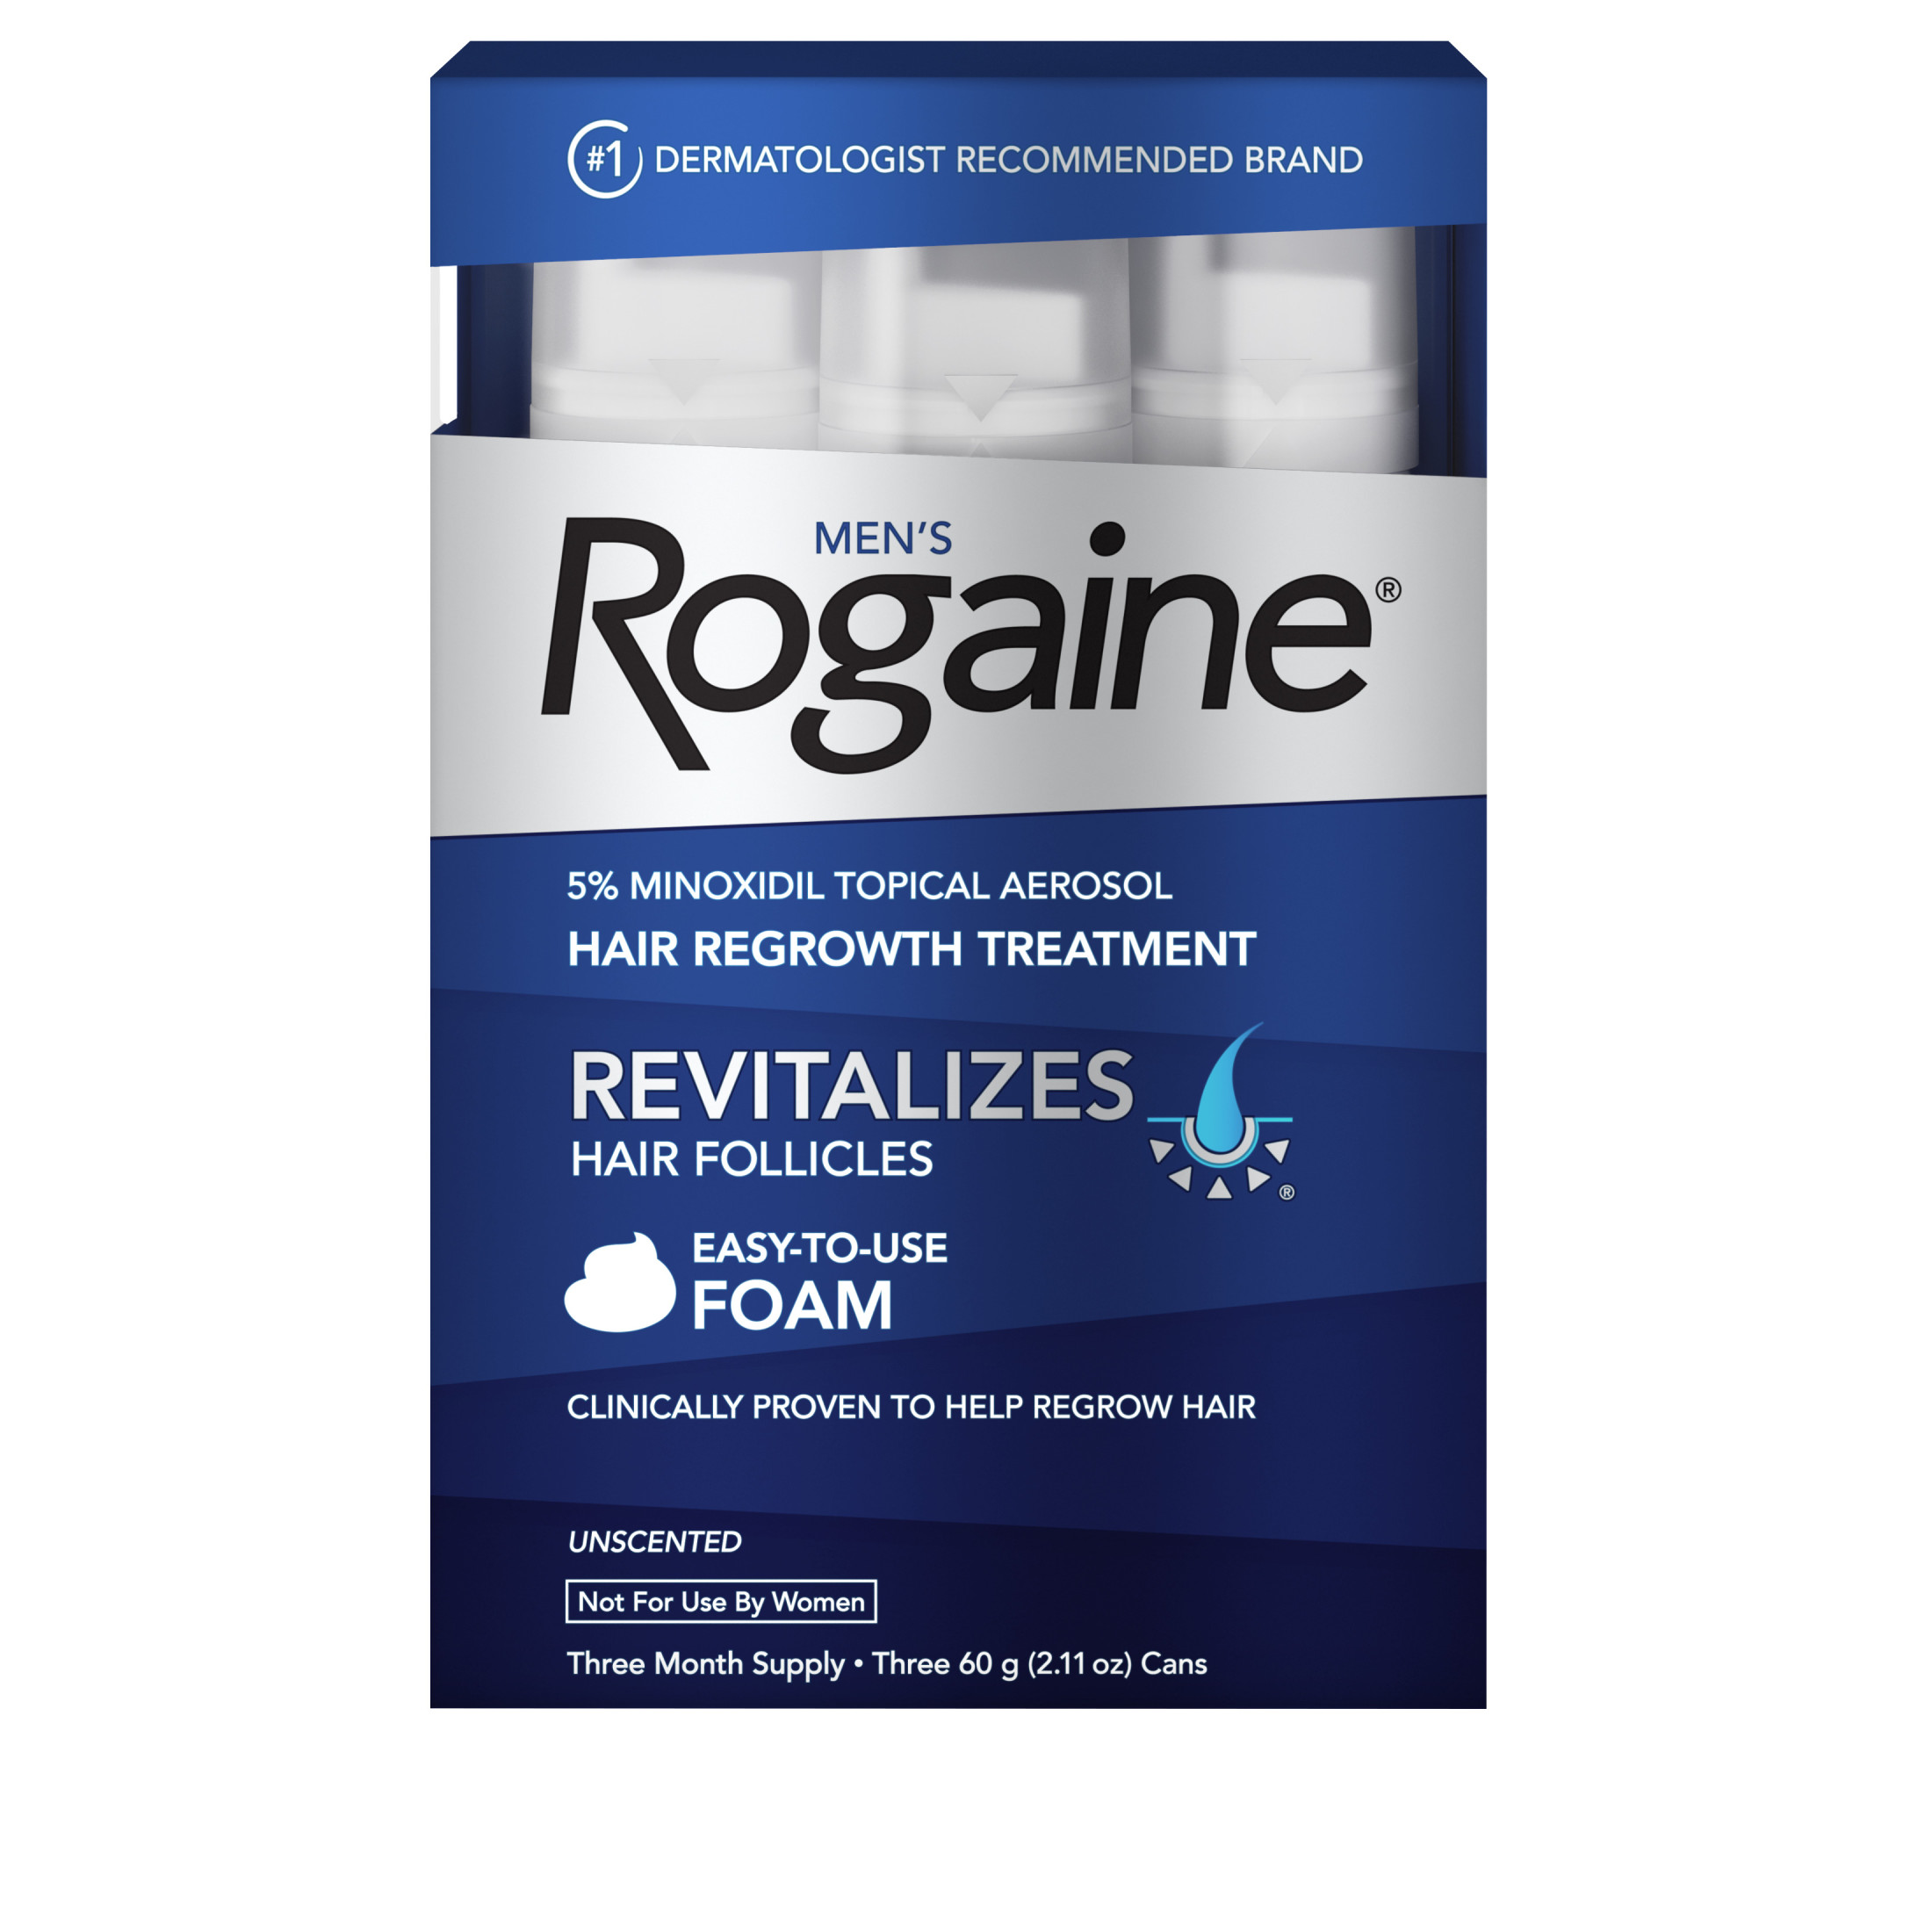 Men's Rogaine 5% Minoxidil Foam for Hair Regrowth, 3-month Supply - image 1 of 19